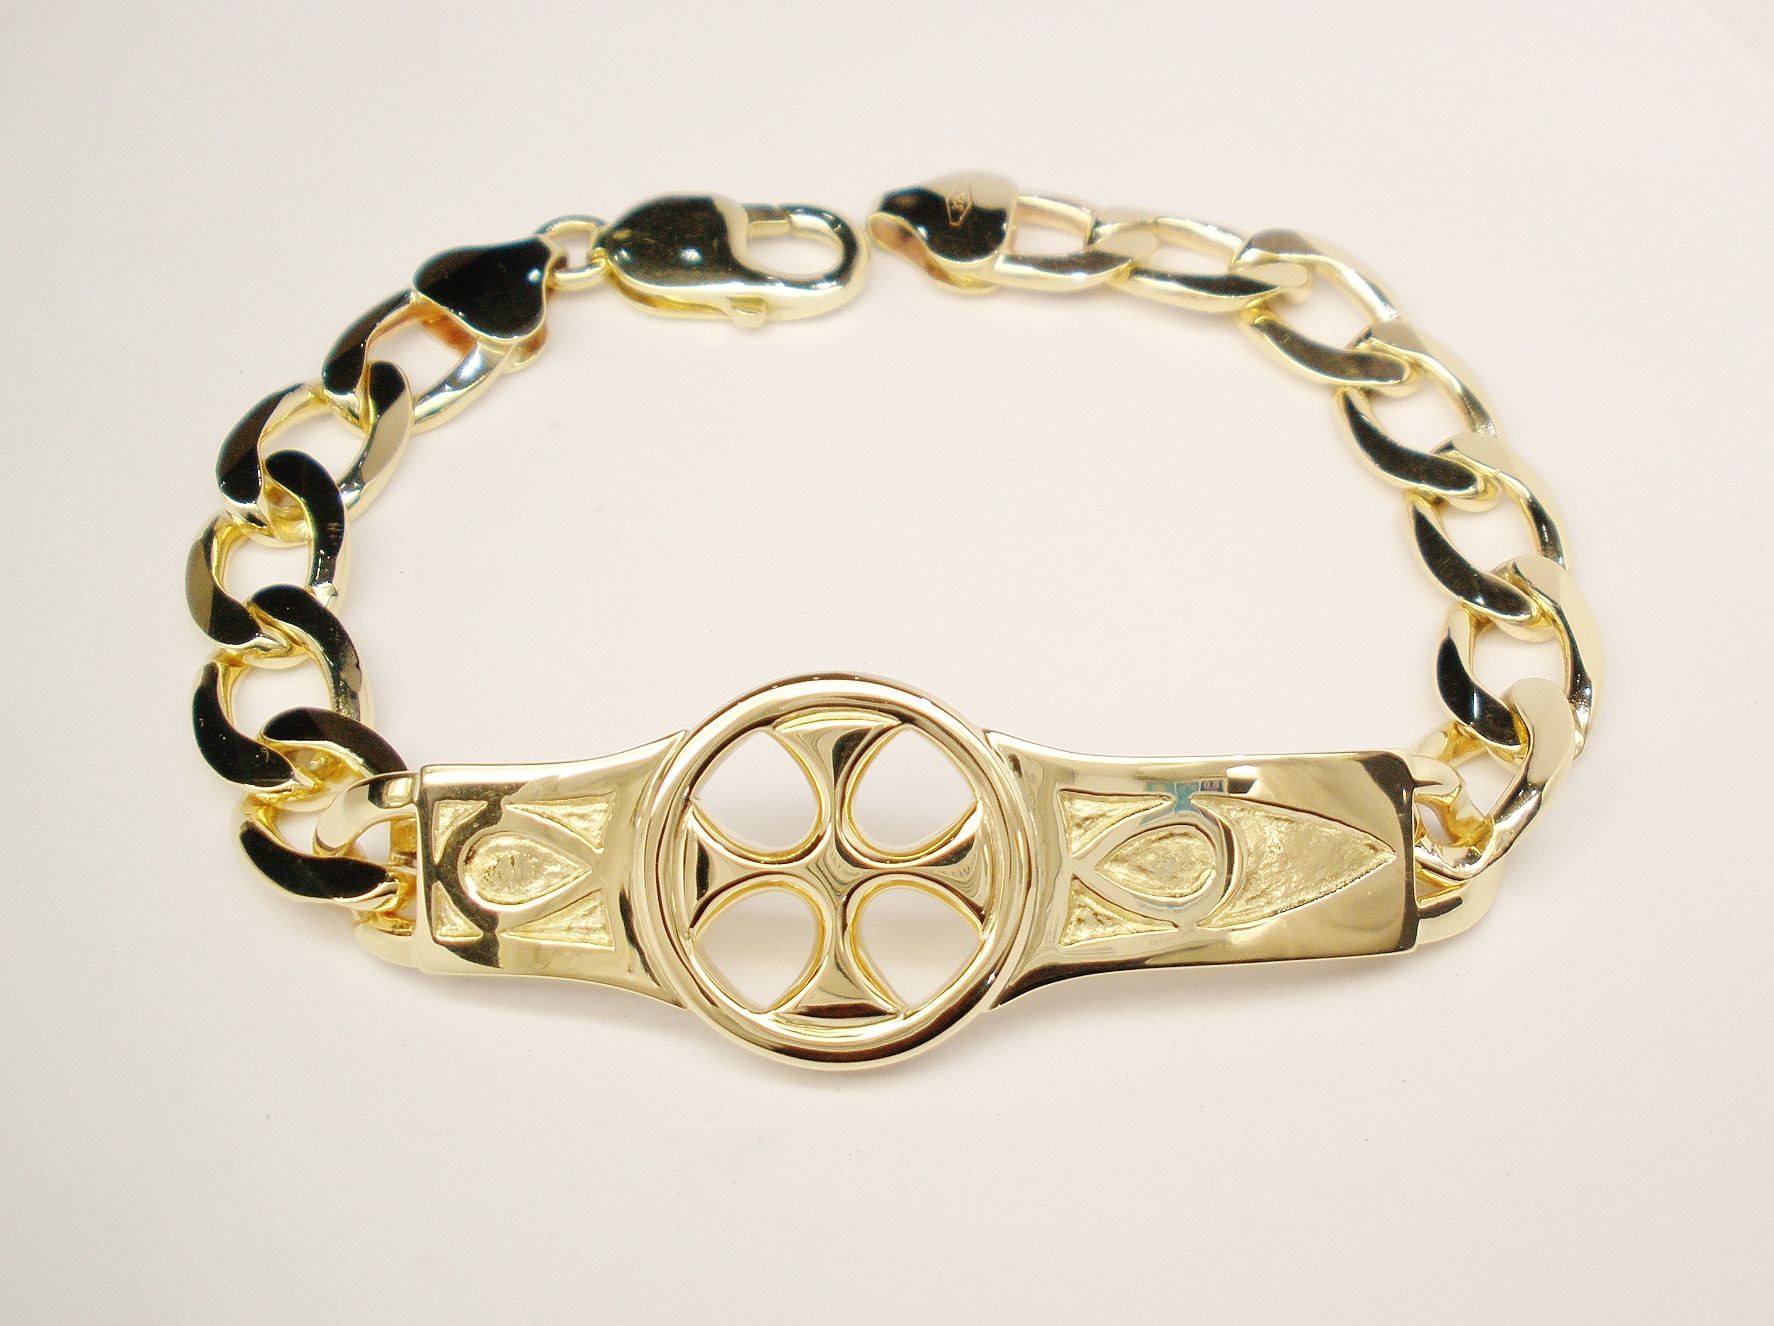 A 9ct. yellow gold bracelet with a hand carved 'Iona' style centre panel.